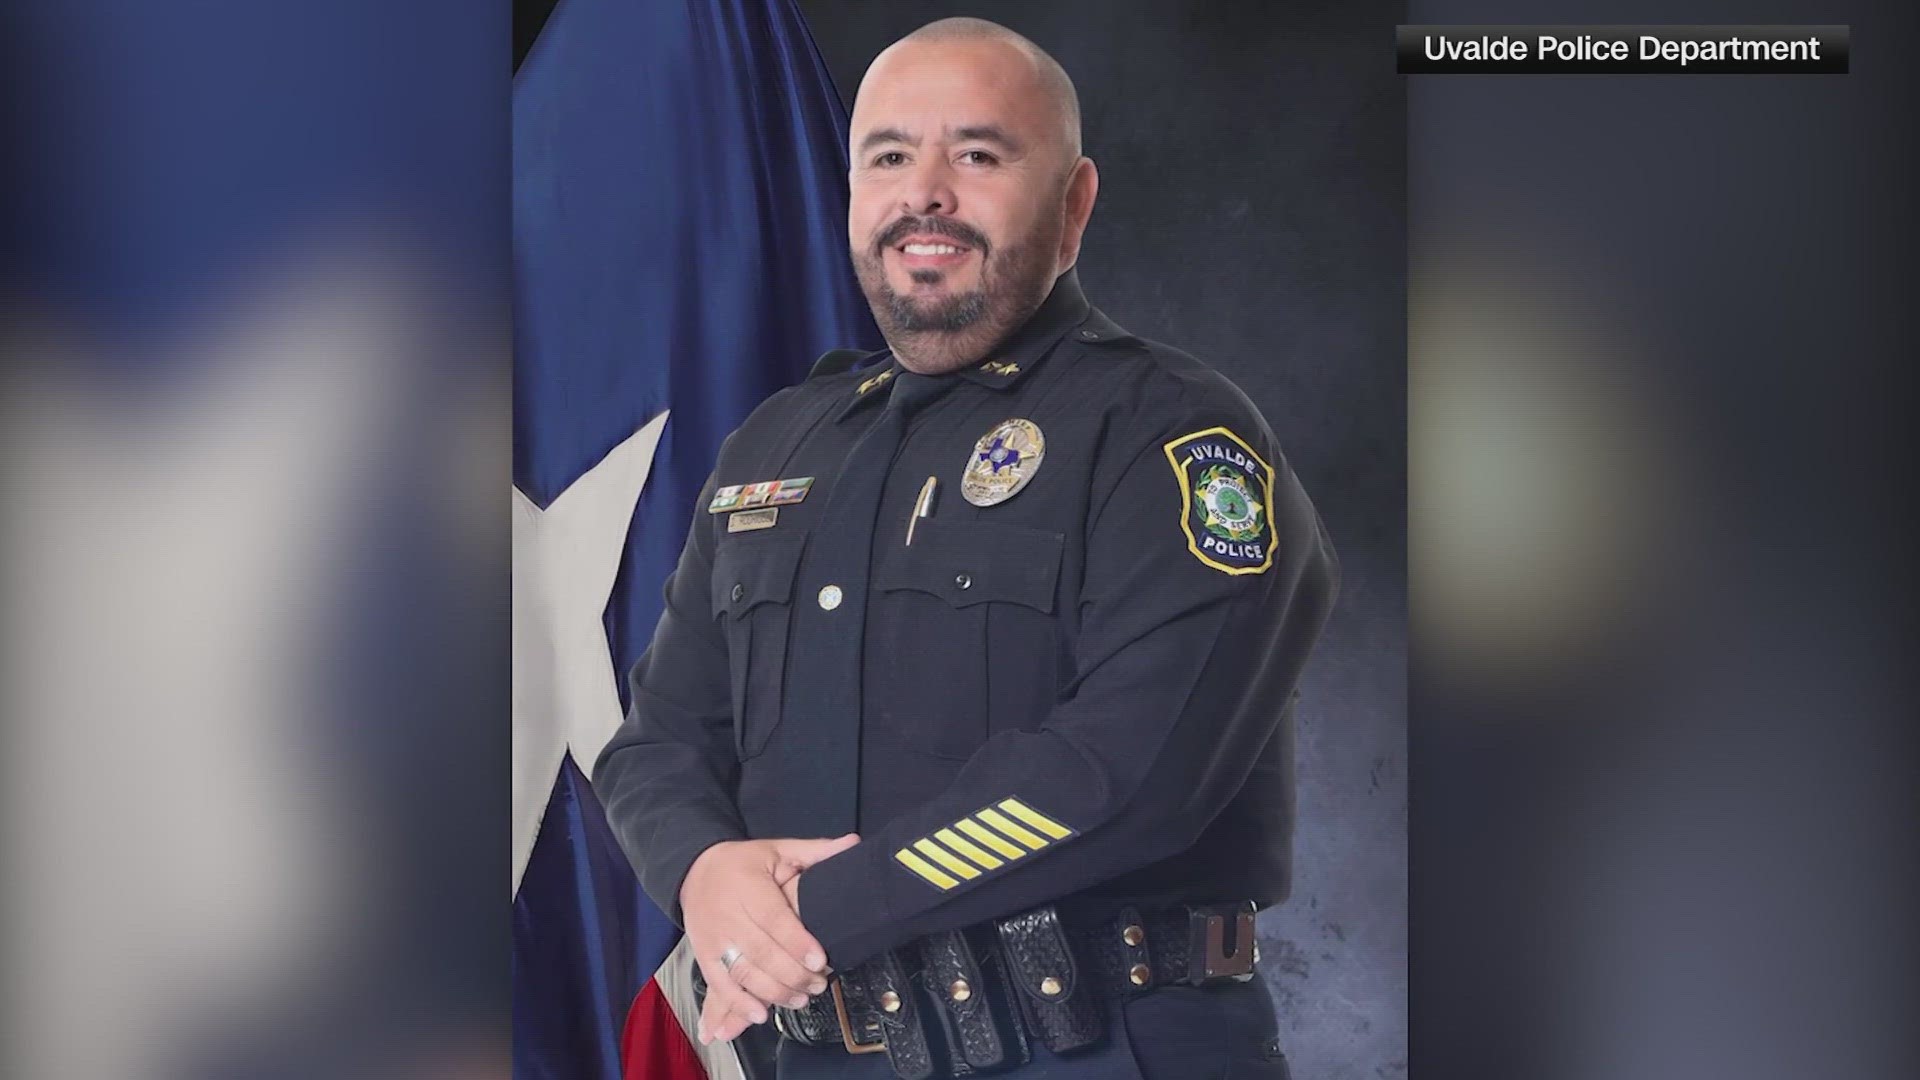 Chief Daniel Rodriguez submitted his resignation less than a week after a report ordered by the city that defended the department's response.